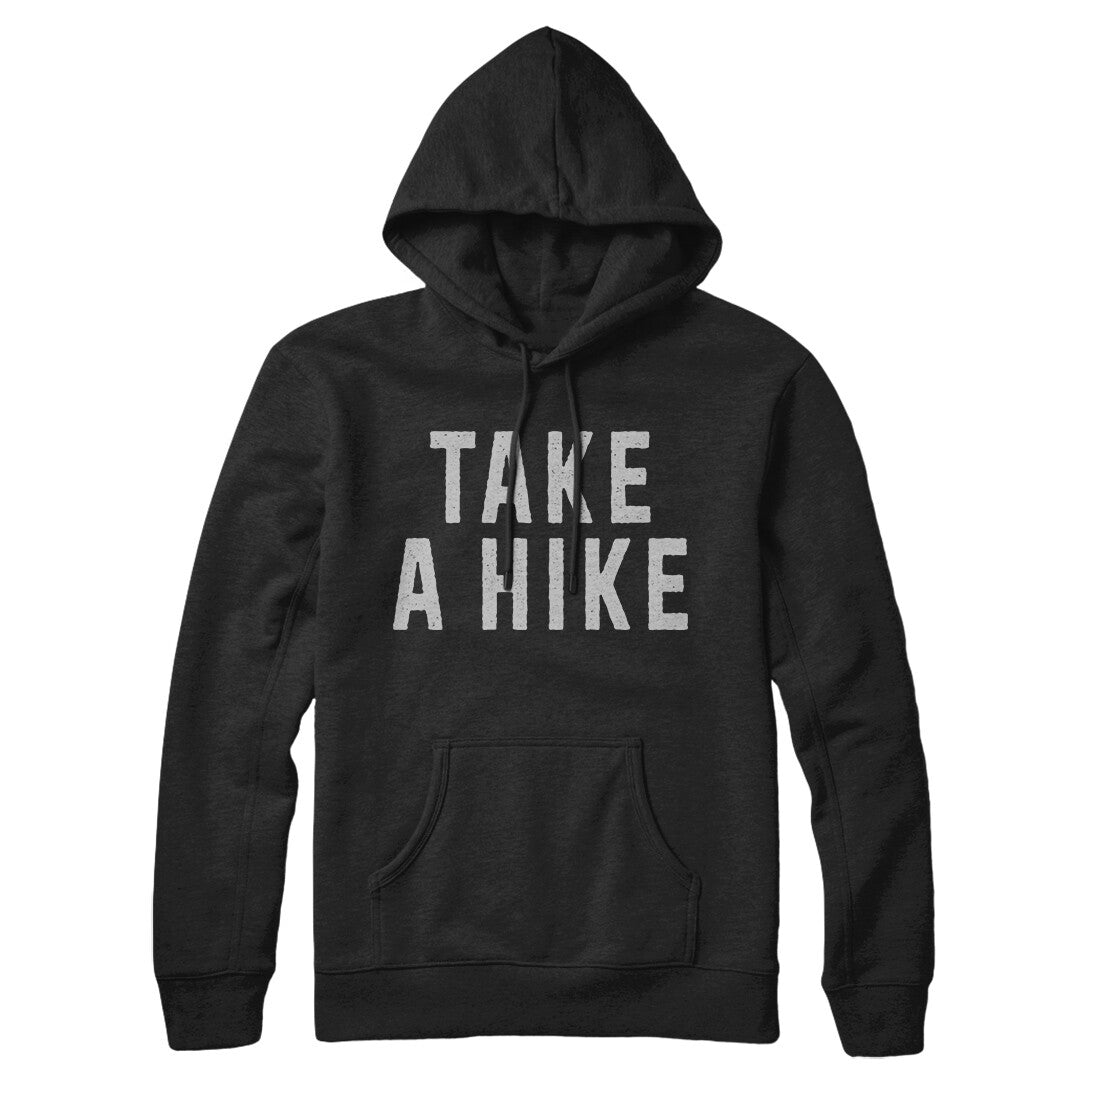 Take a Hike in Black Color